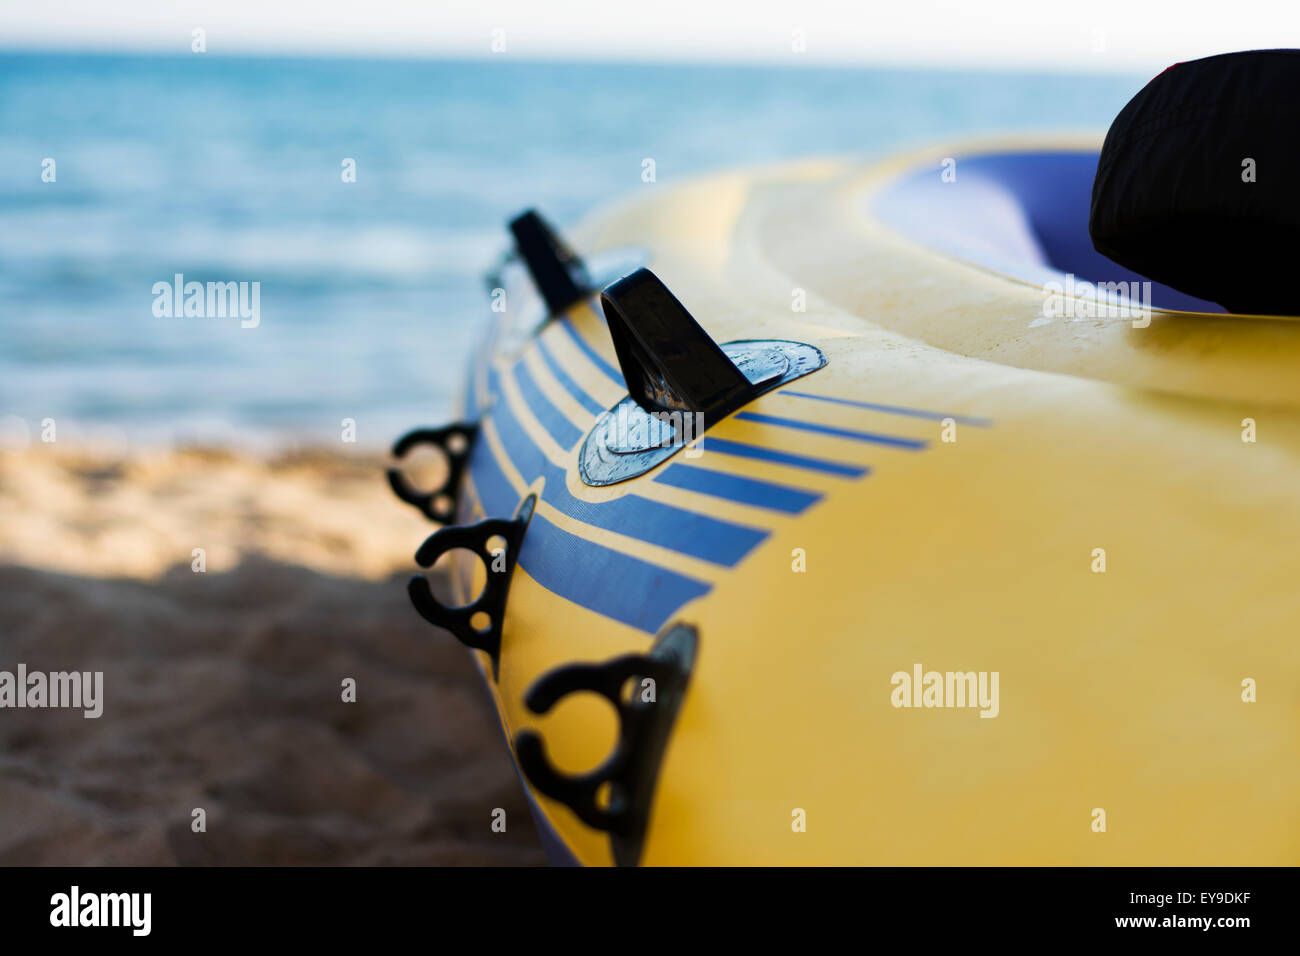 Rubber boat pumped and ready for use on the beach Stock Photo